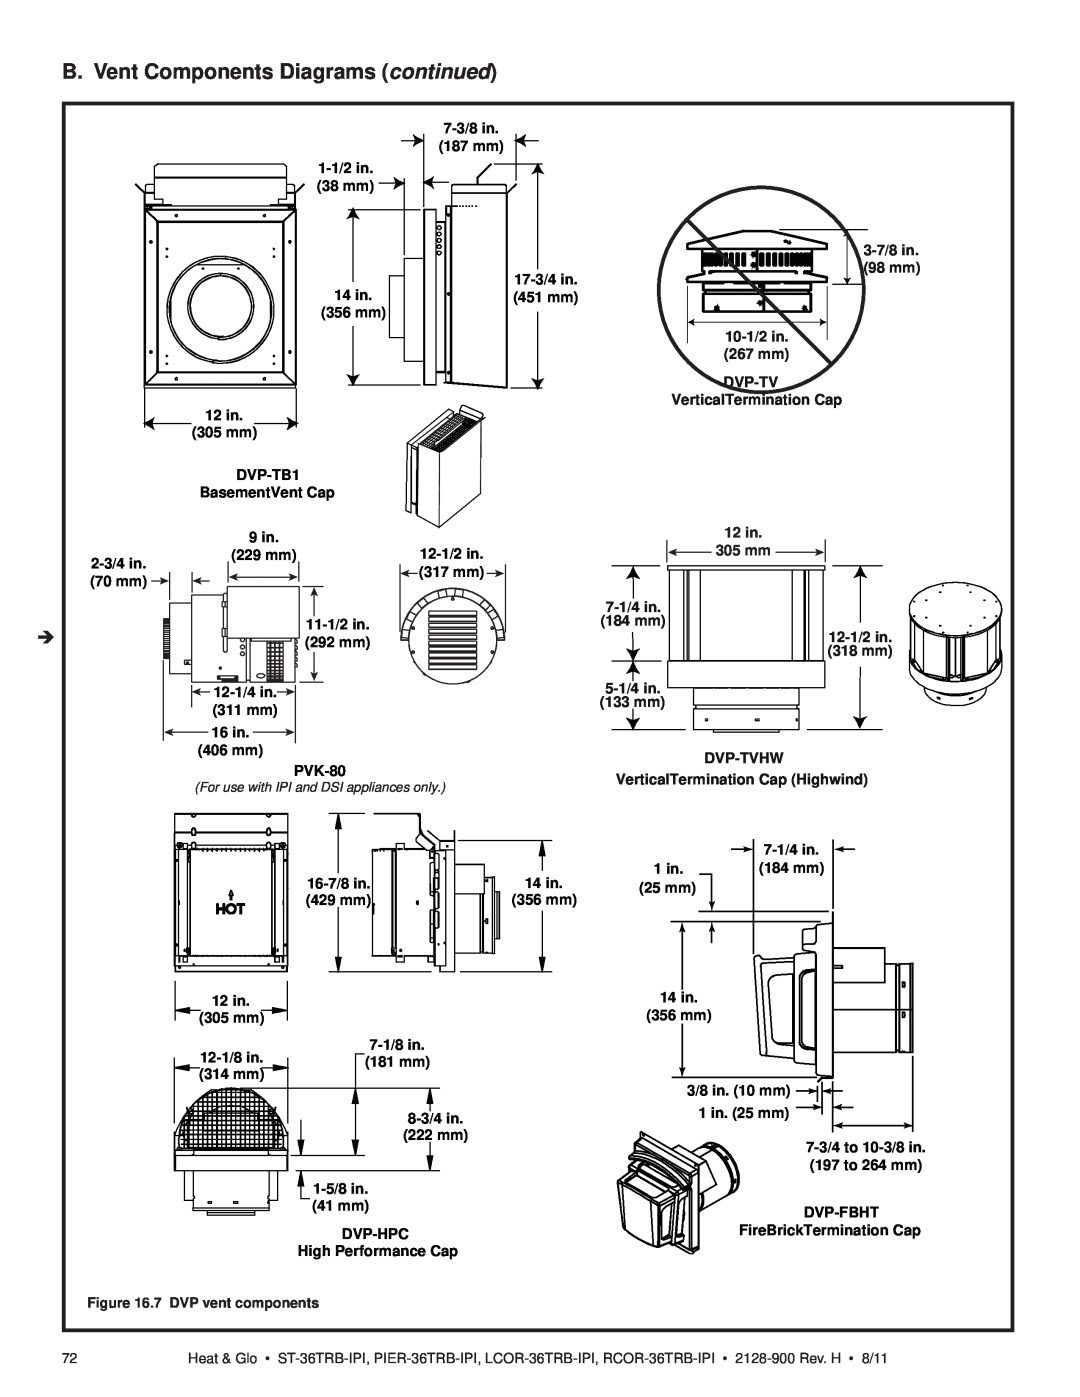 Heat & Glo LifeStyle ST-36TRB-IPI B. Vent Components Diagrams continued, 3-7/8in, 98 mm, 10-1/2in, 267 mm, Dvp-Tv, 12 in 